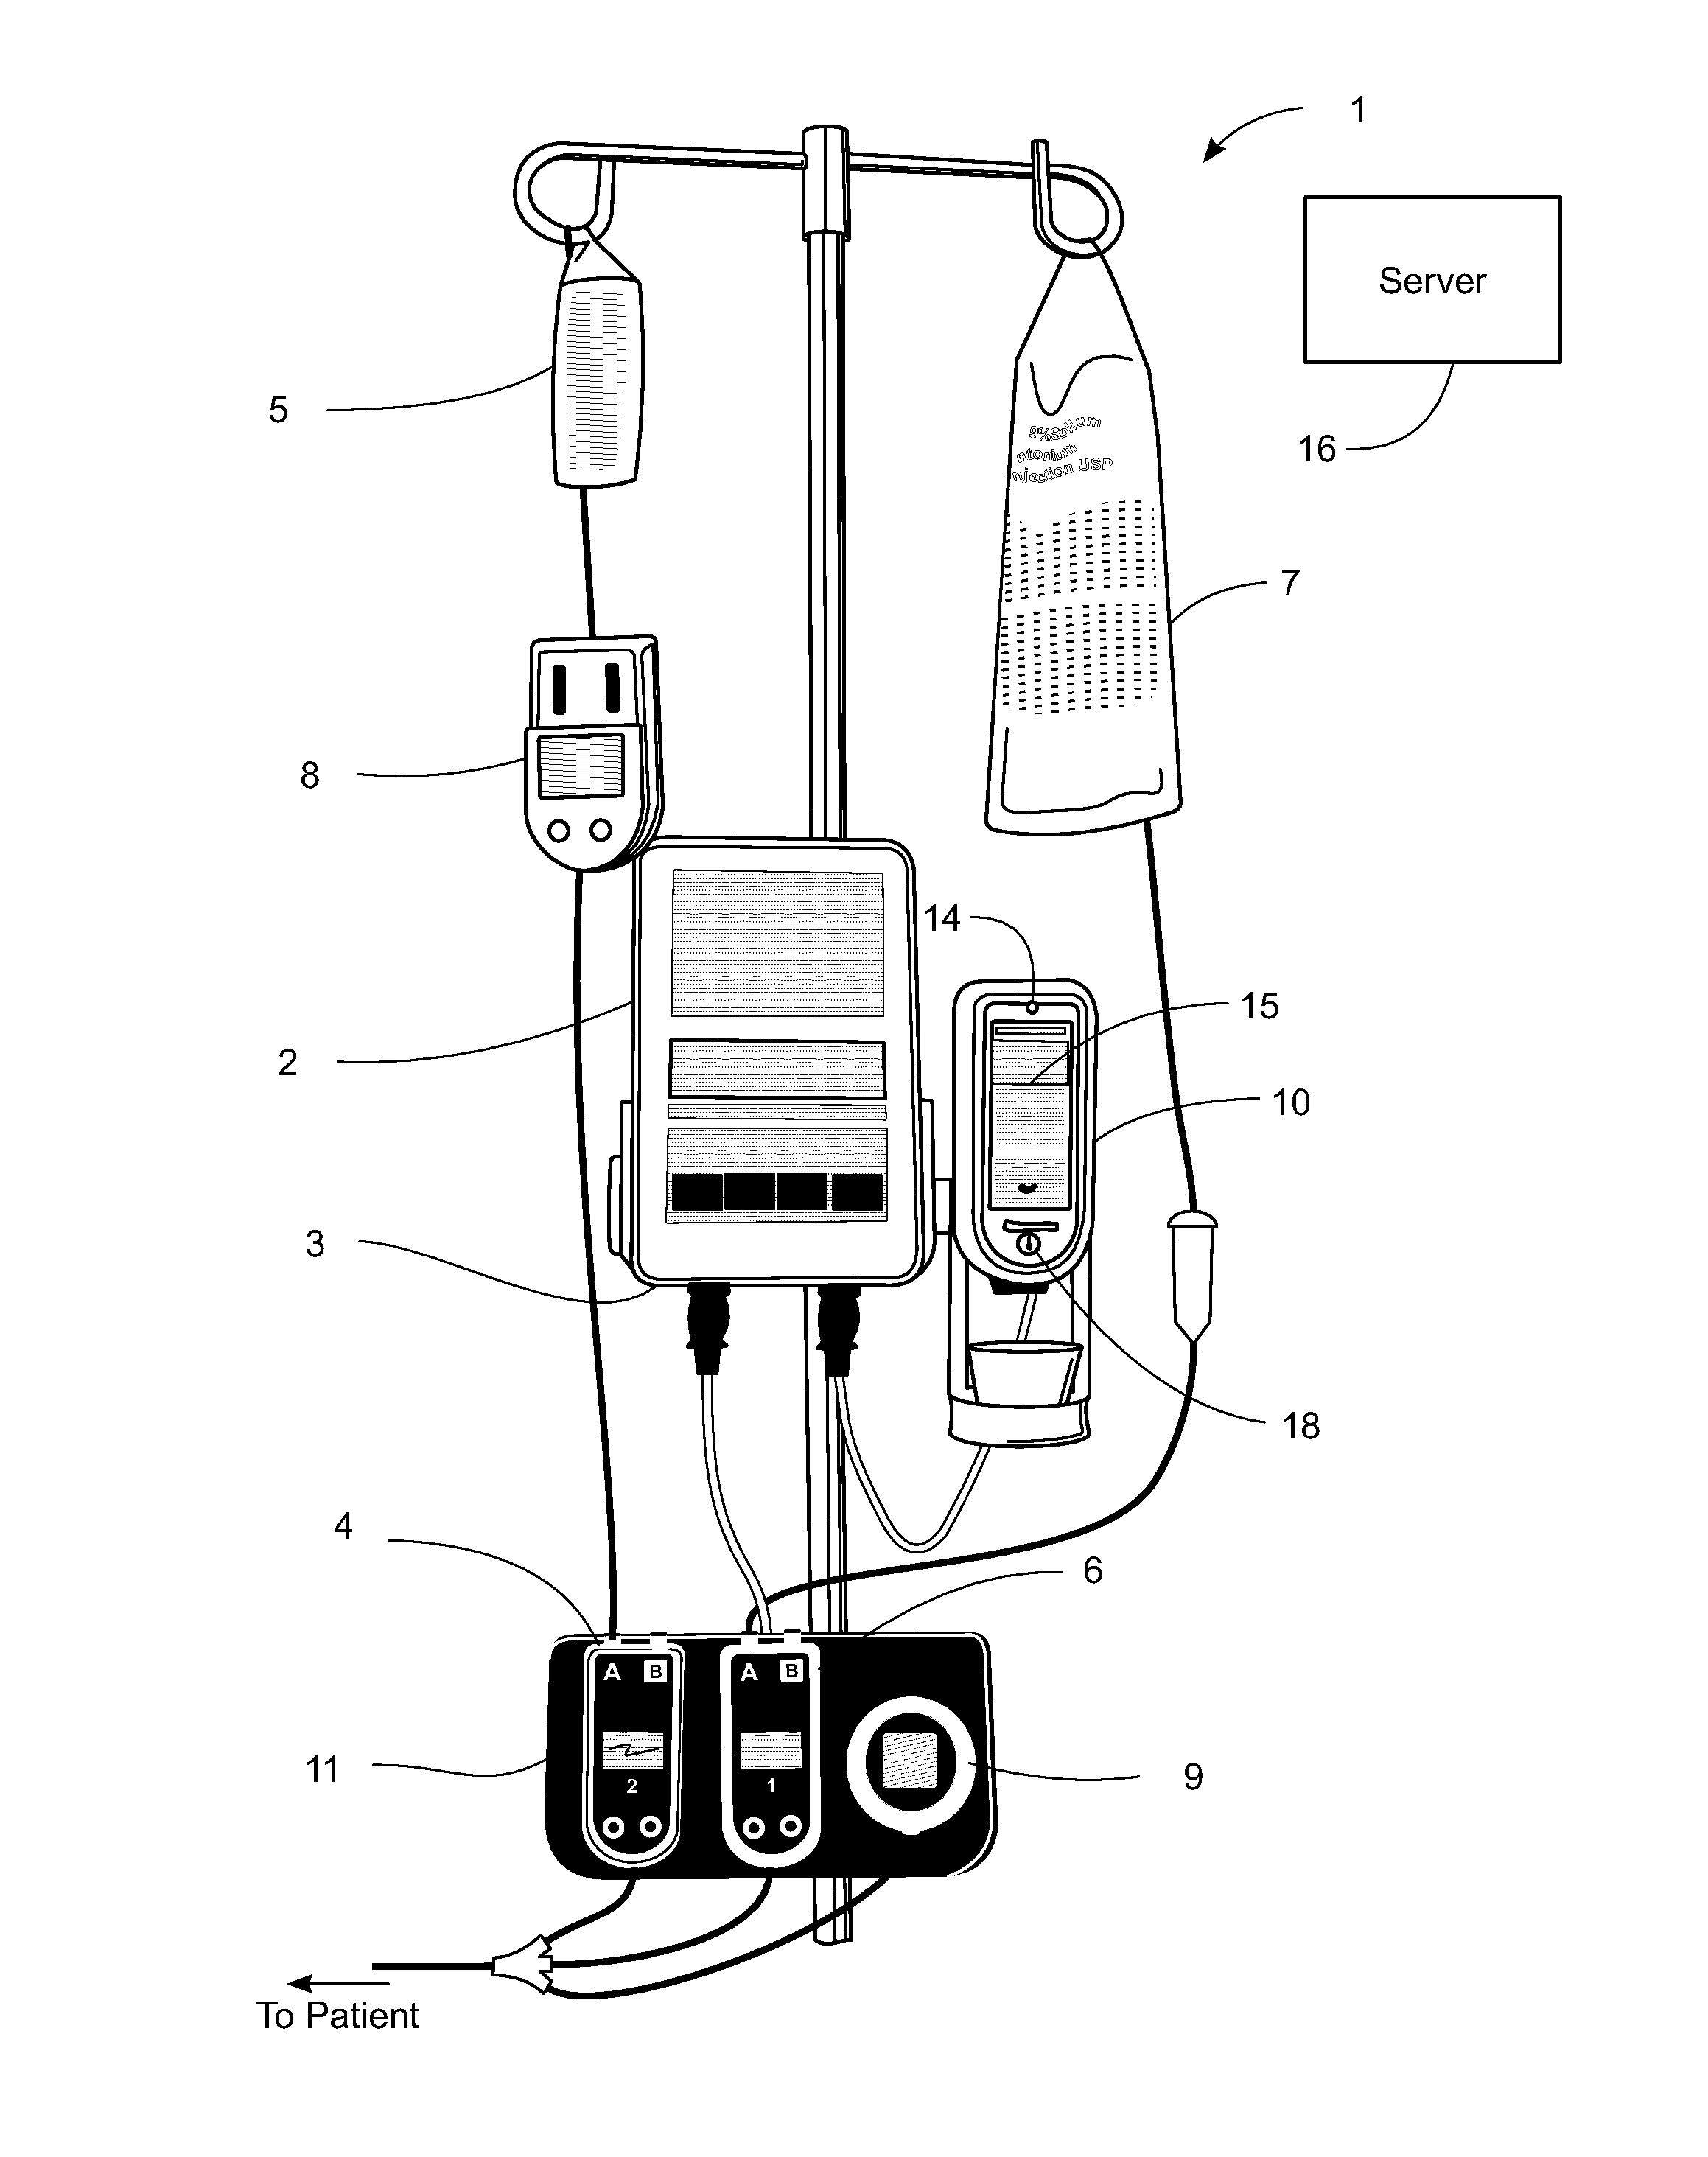 System, method, and apparatus for dispensing oral medications